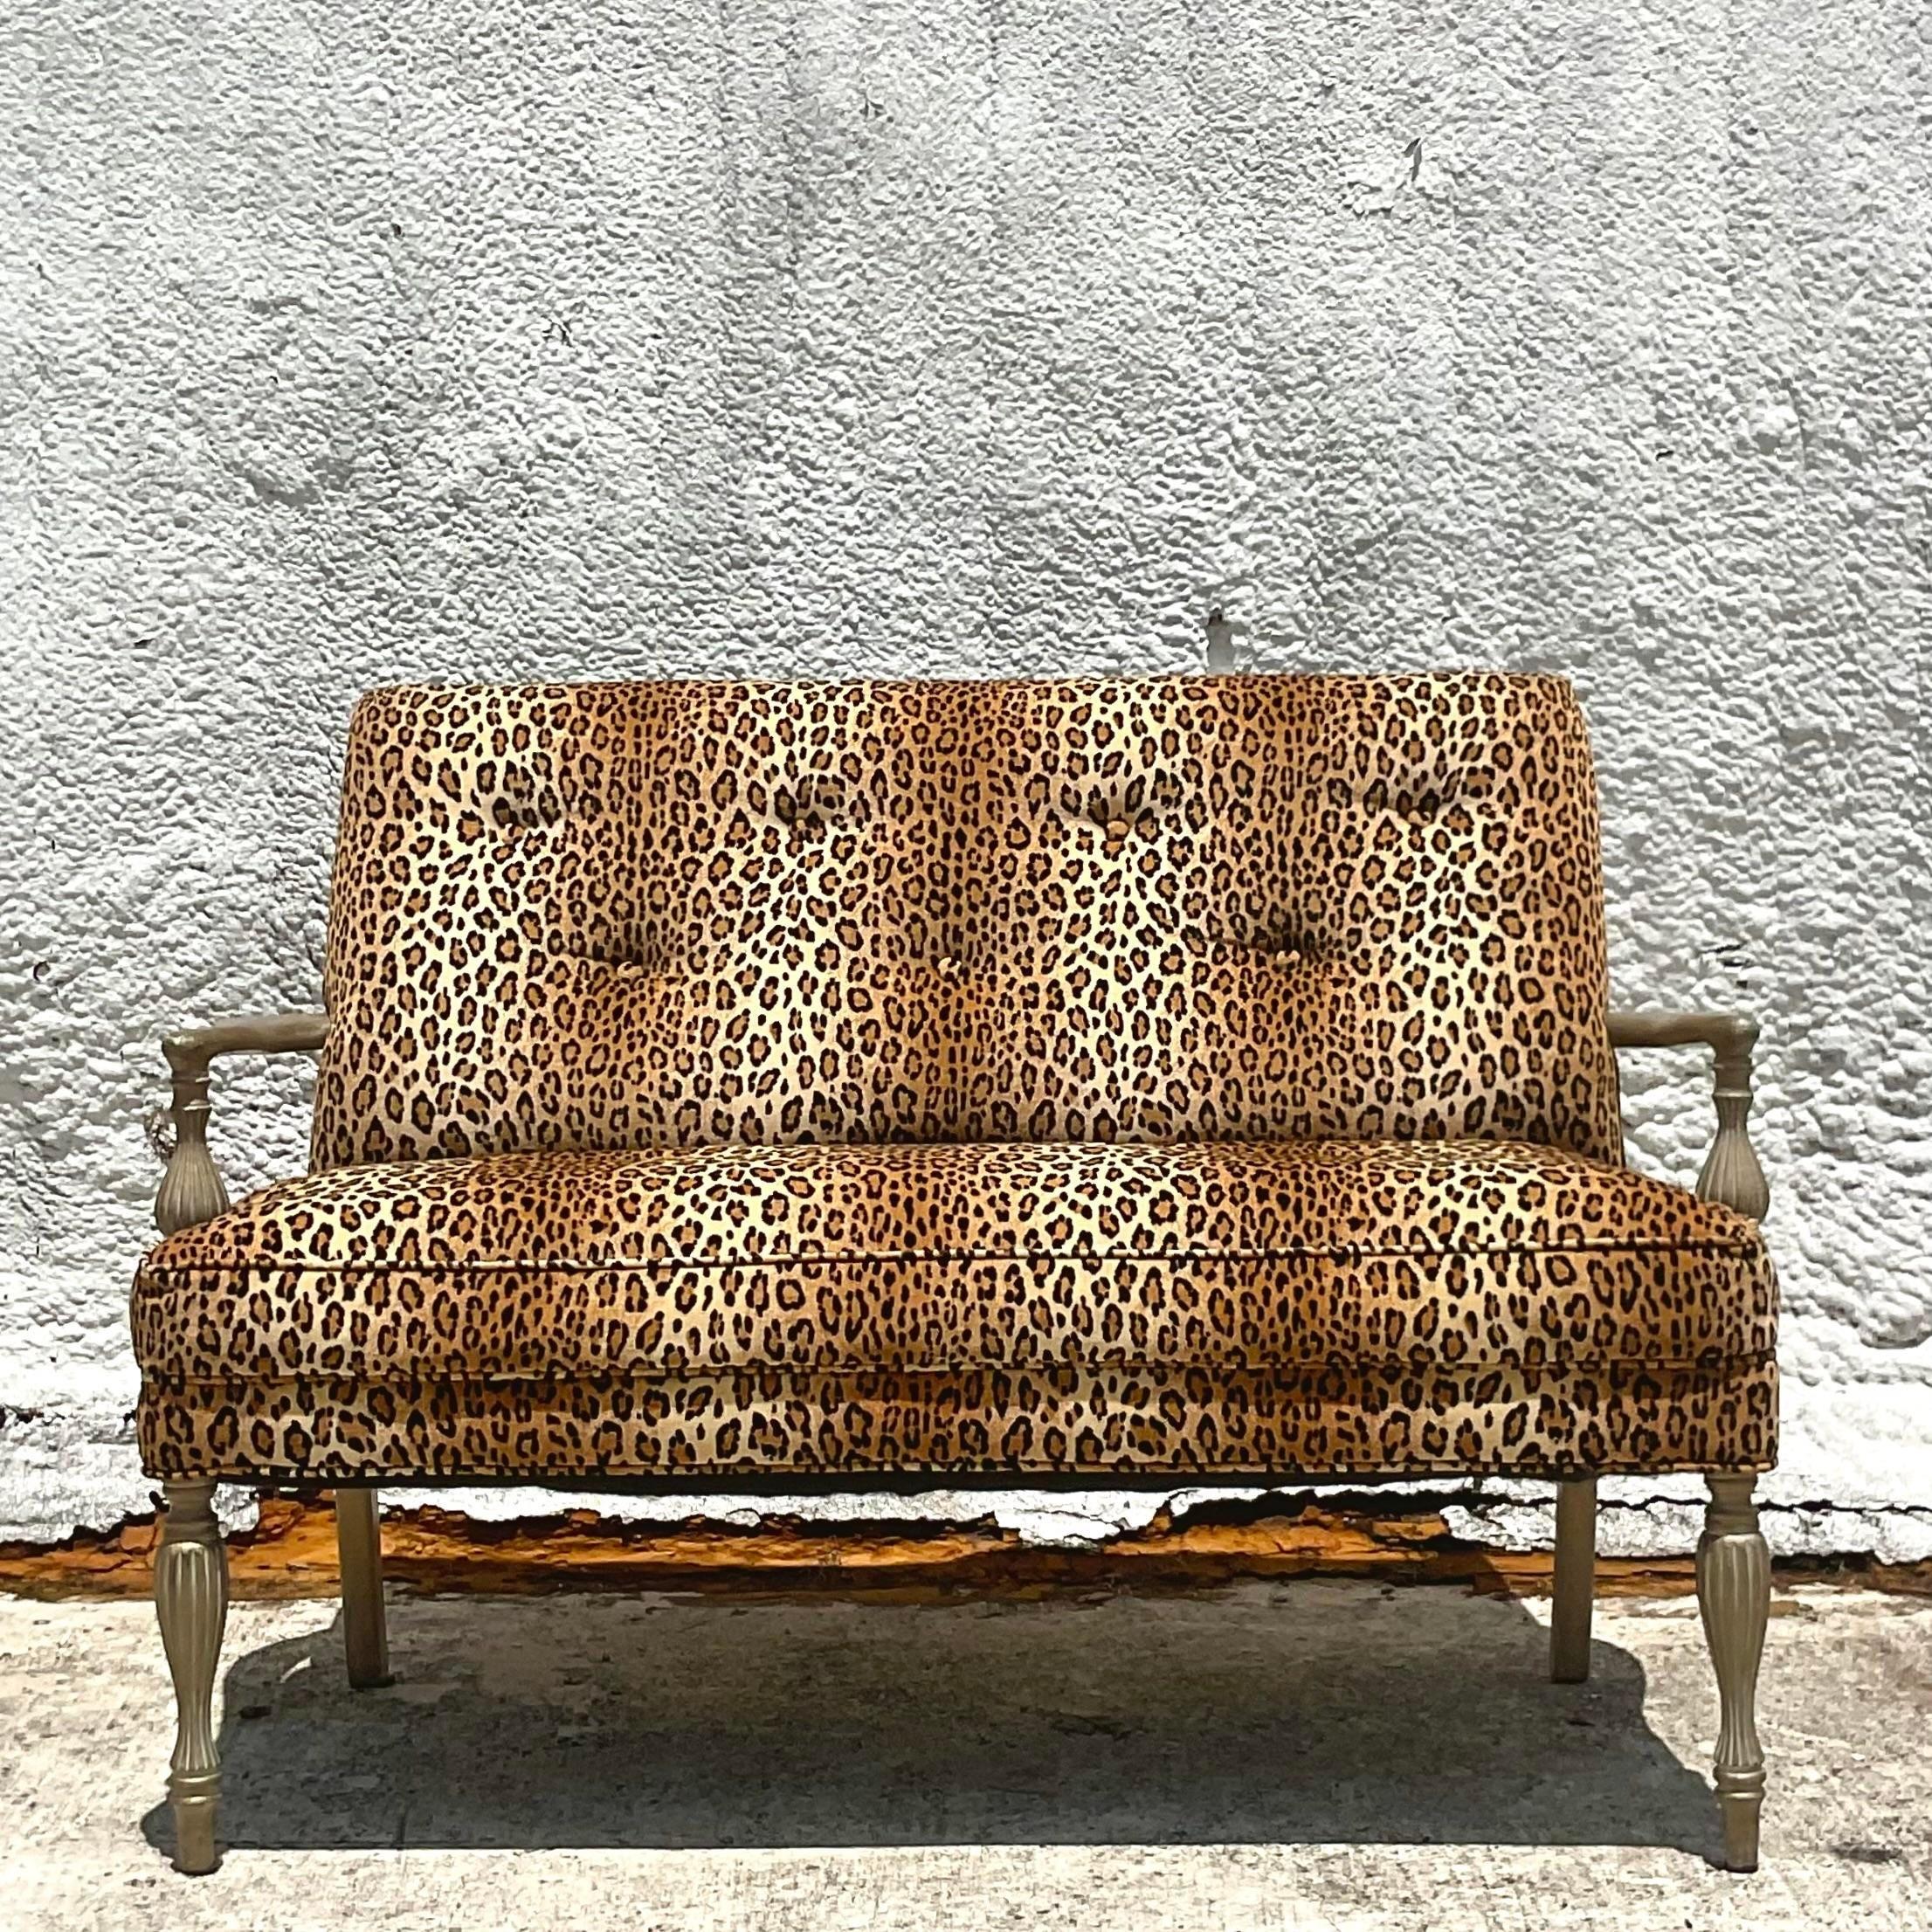 A fabulous vintage Boho settee. A chic leopard upholstery with tufting. Hand carved frame in a vintage finish. Acquired from a Palm Beach estate.